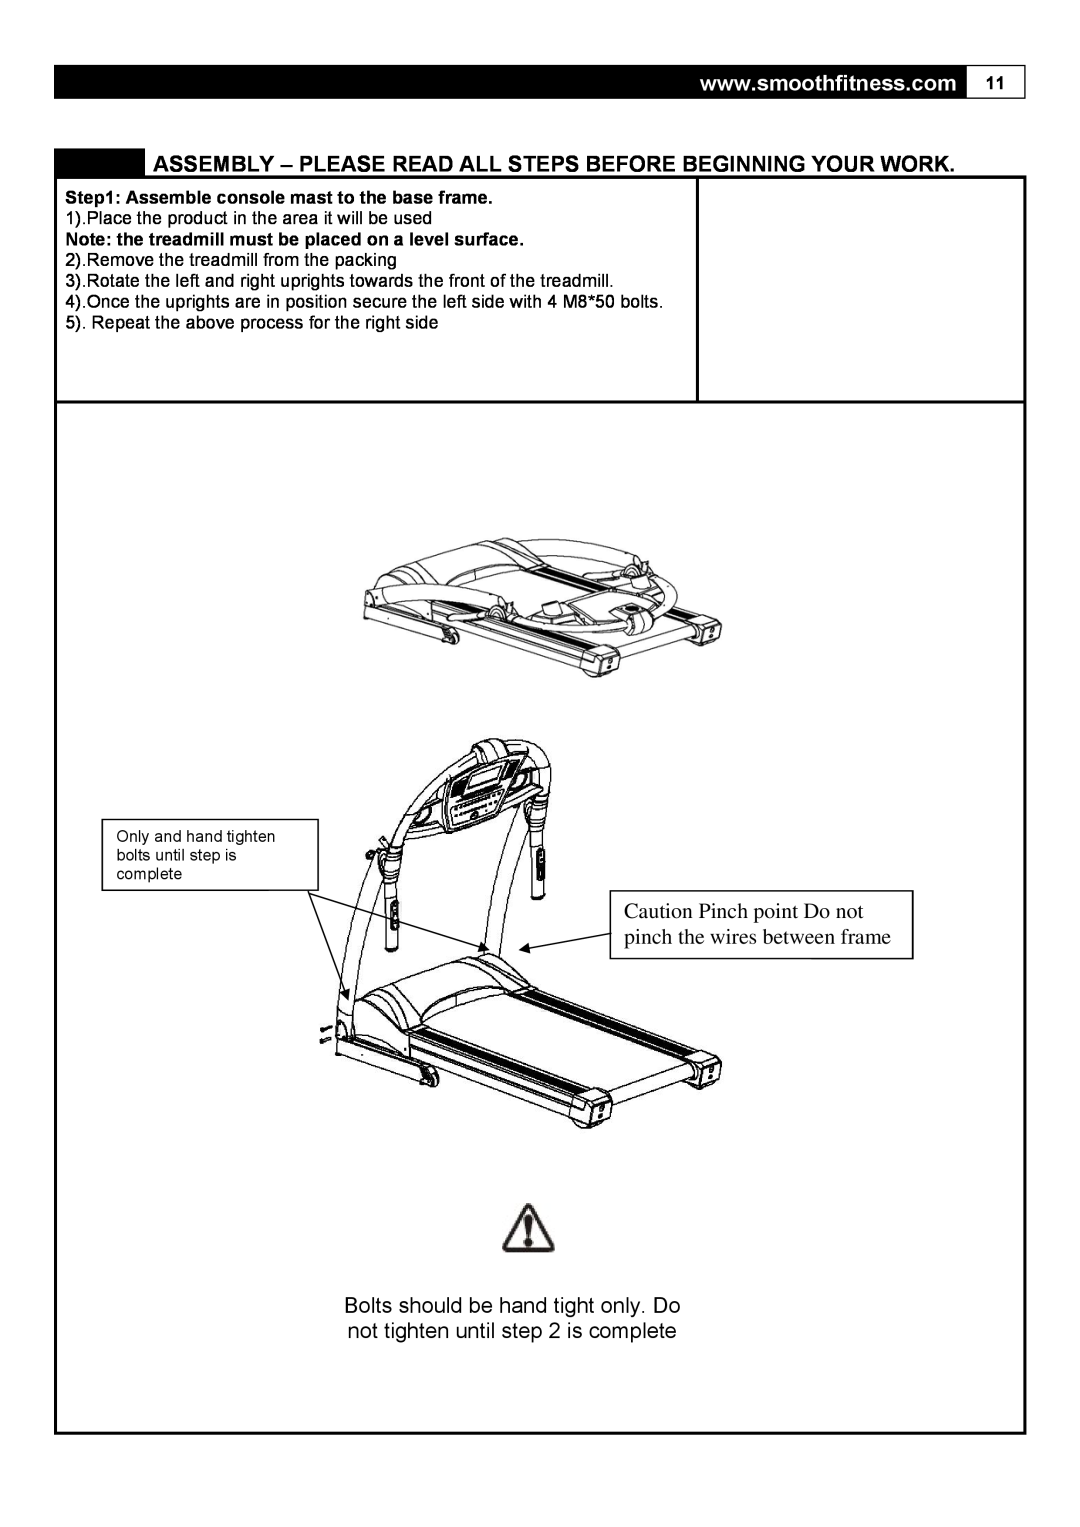 Smooth Fitness 5.65I user manual Assembly - Please Read All Steps Before Beginning Your Work 